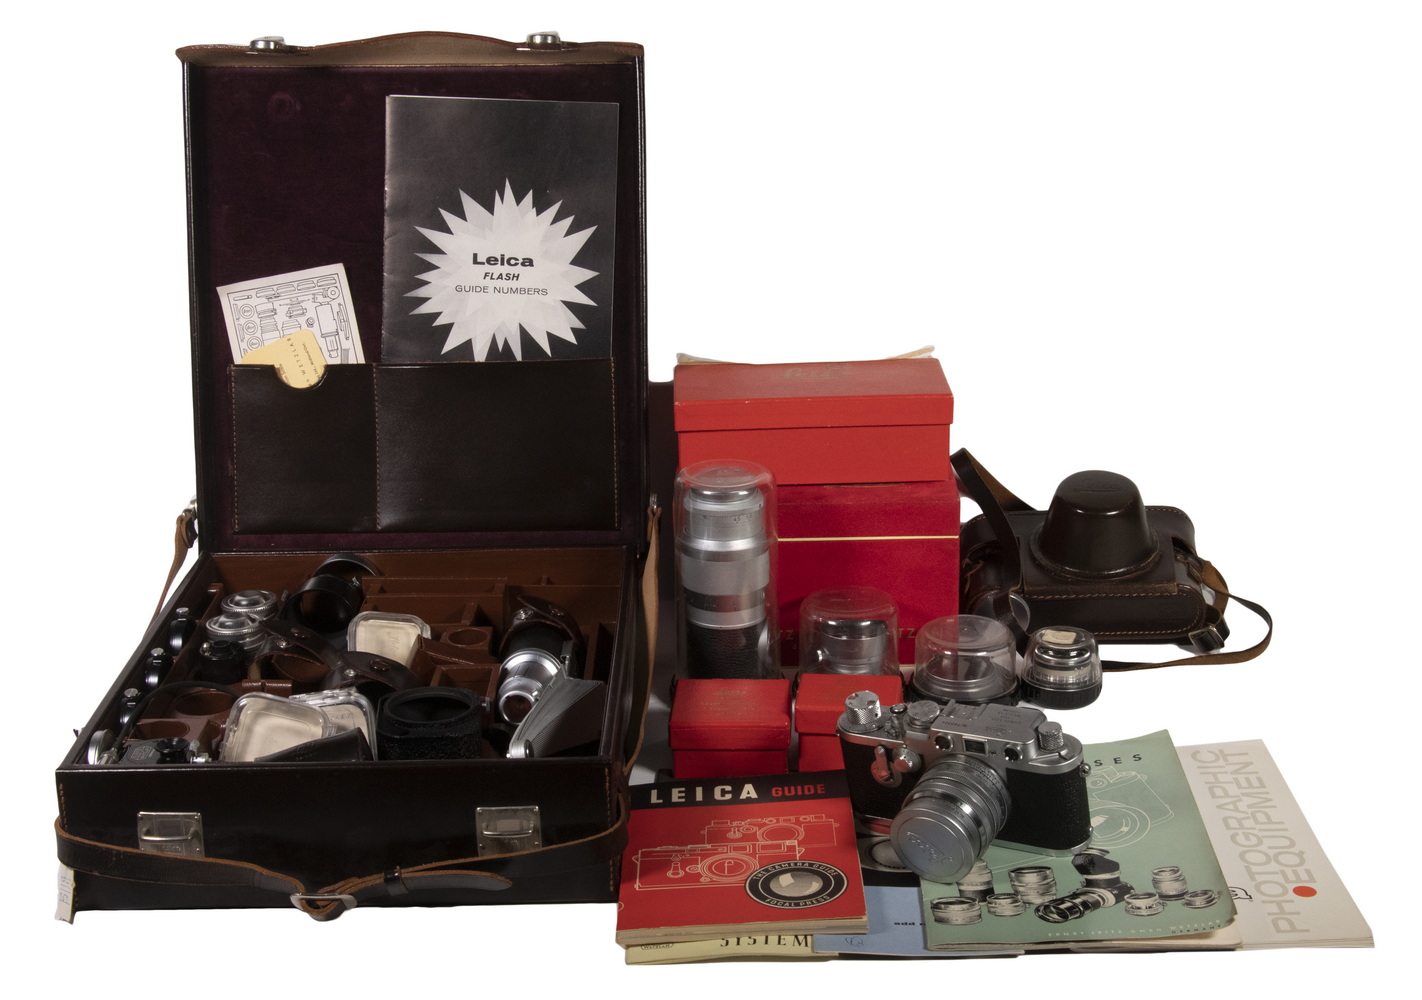 LEICA LEITZ 35MM CAMERA WITH ACCESSORIES 2b3ad5